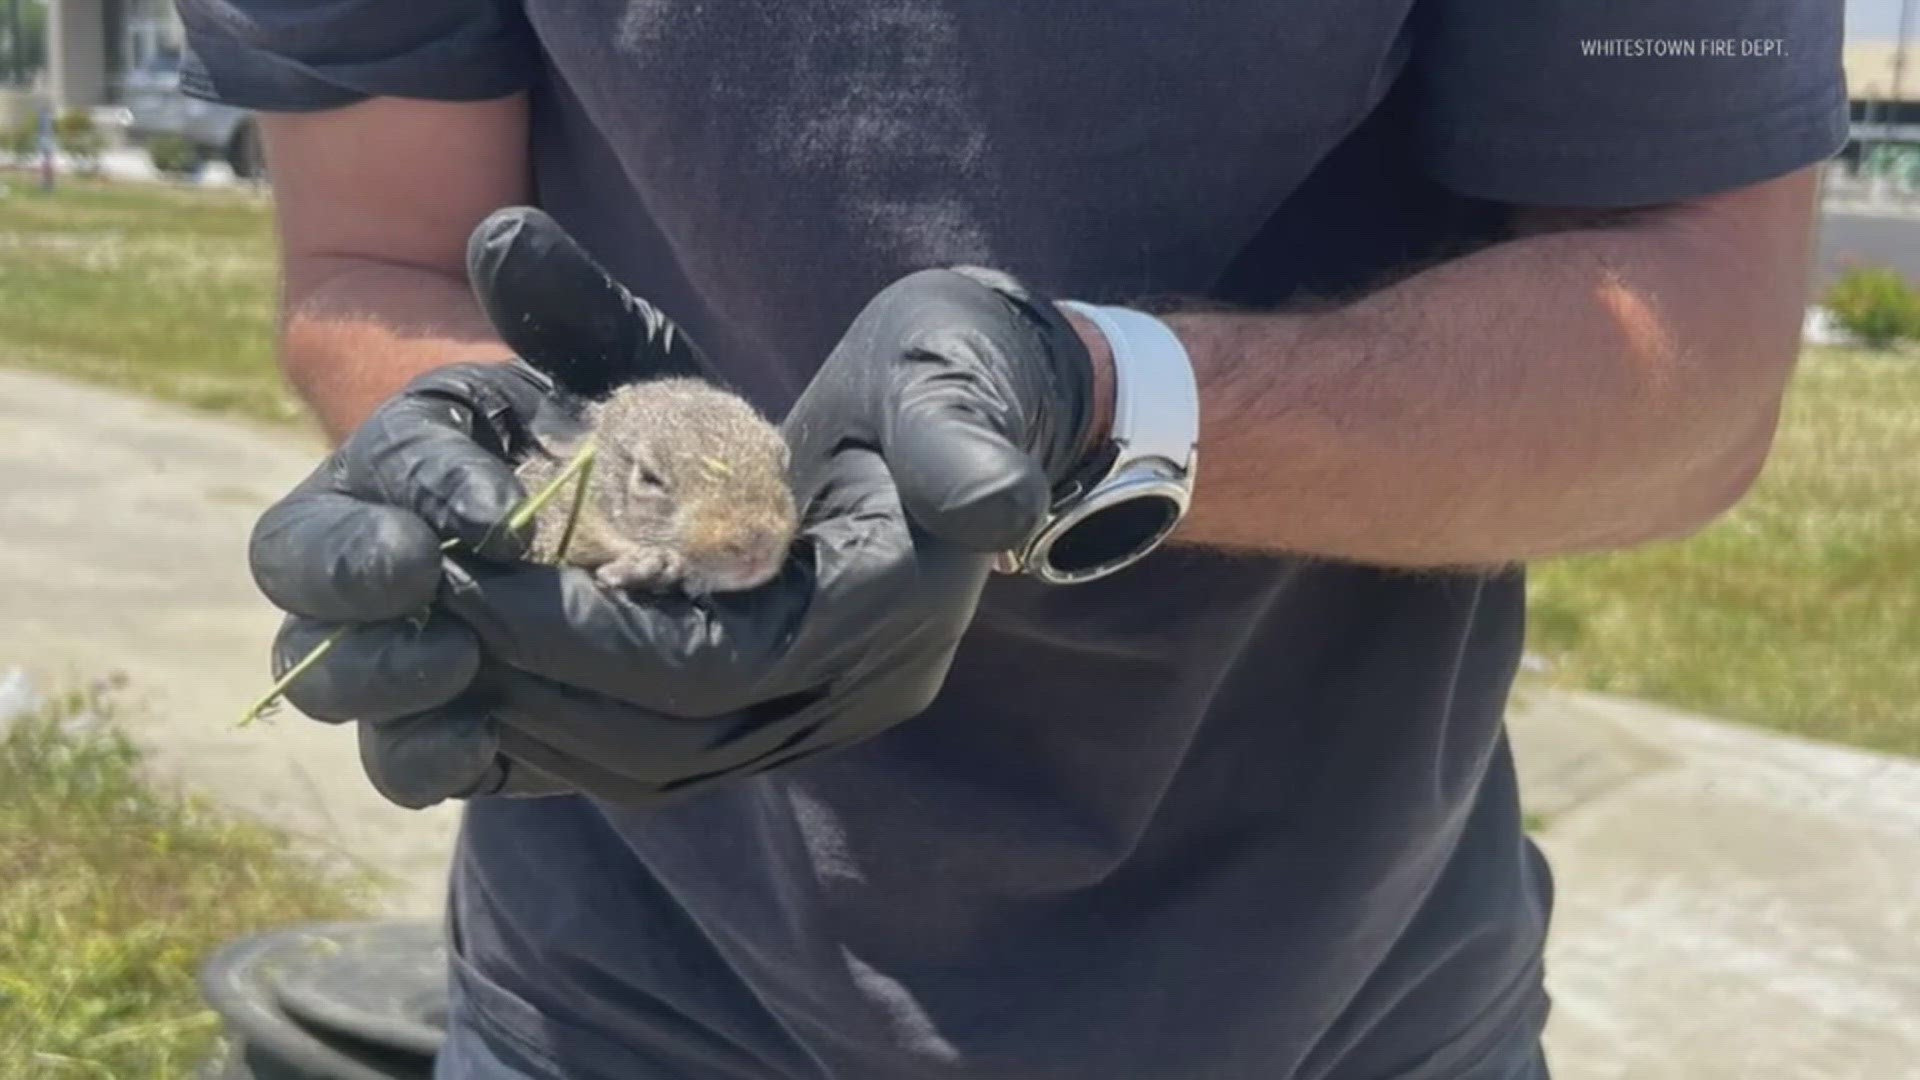 Firefighters in Whitestown rescued a baby bunny from a storm drain and shared photos on social media.